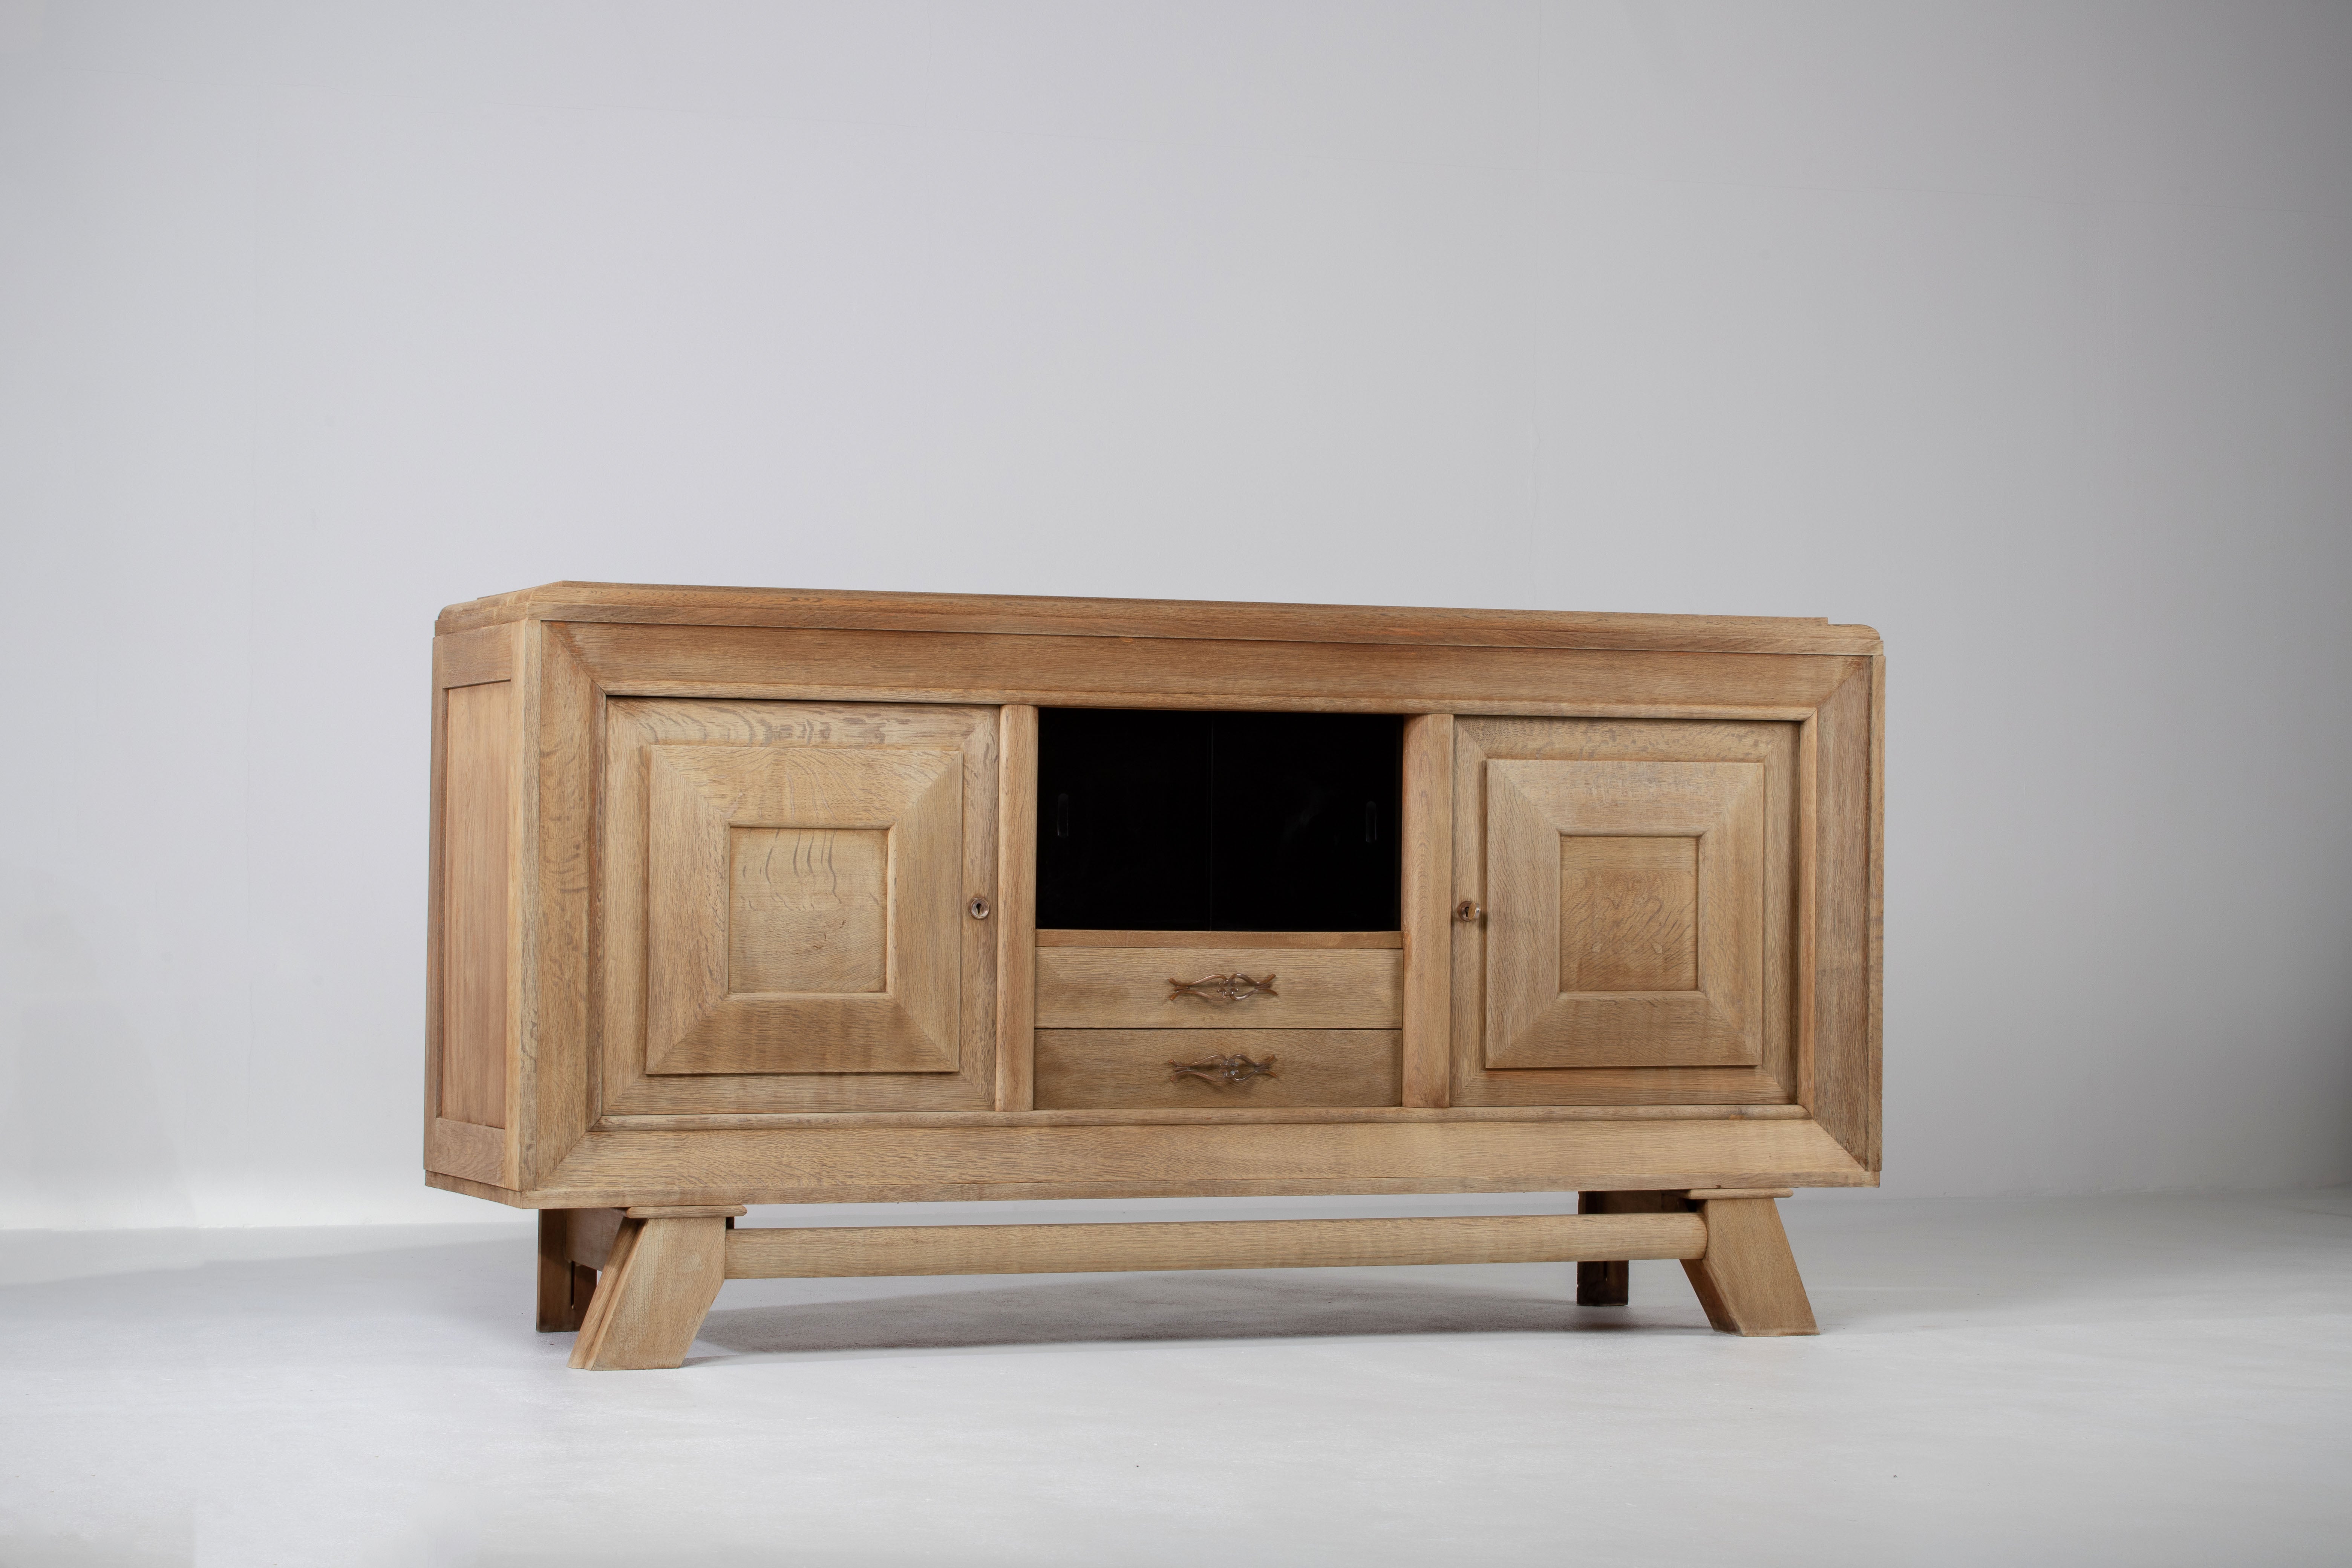 French Art Deco bleached sideboard, credenza in oak. The sideboard features stunning Oak sanded wood grain with a stunning patina. It offers ample storage, with shelves. The top is covered with marquetry.
The sideboard is in excellent original